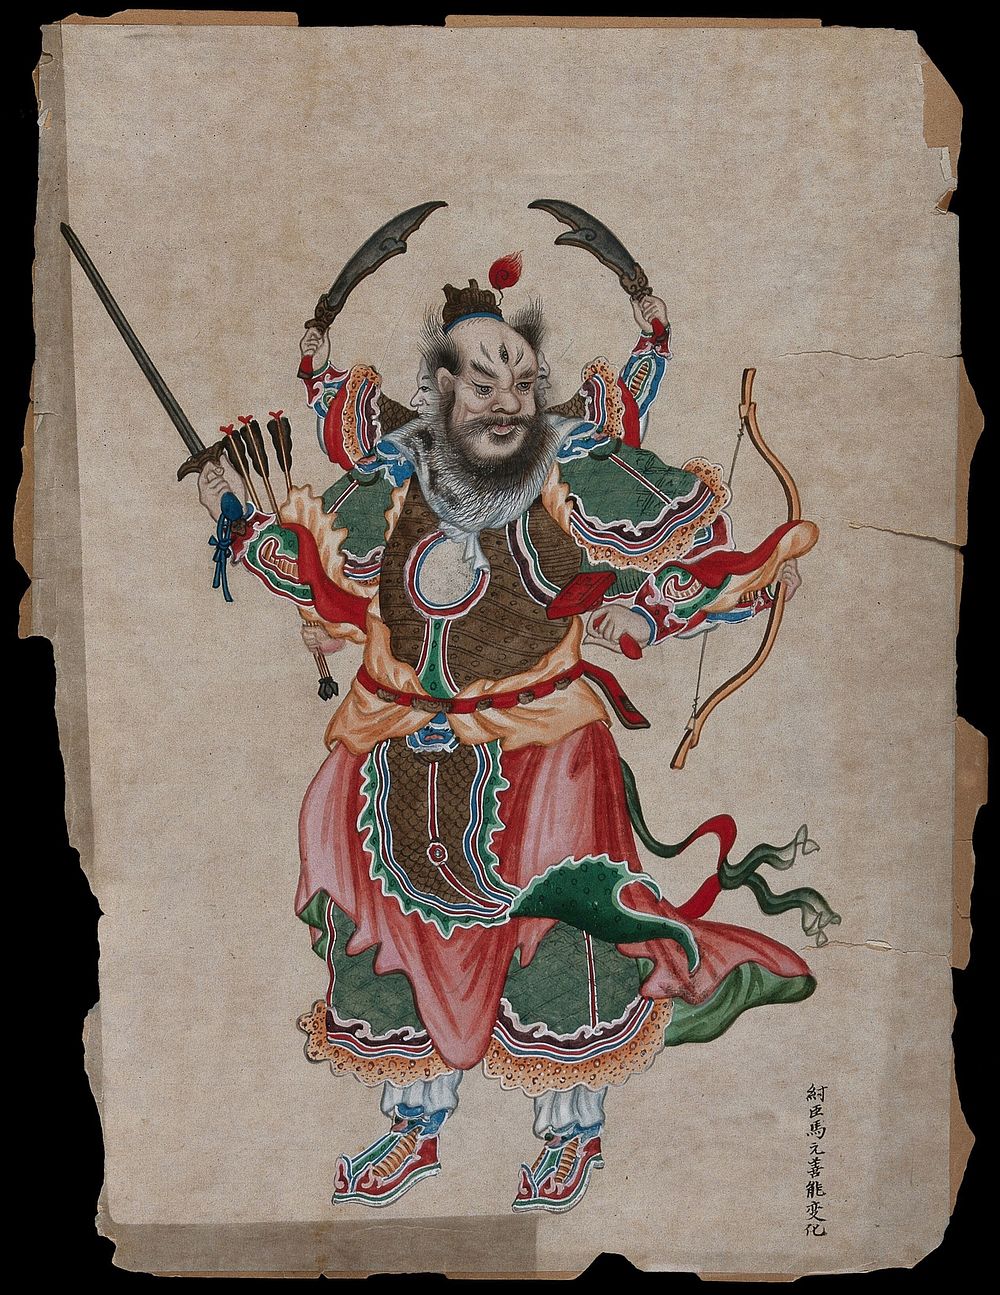 A Chinese deity with the third eye, a bow and arrows and two curved daggers. Gouache painting by a Chinese artist.